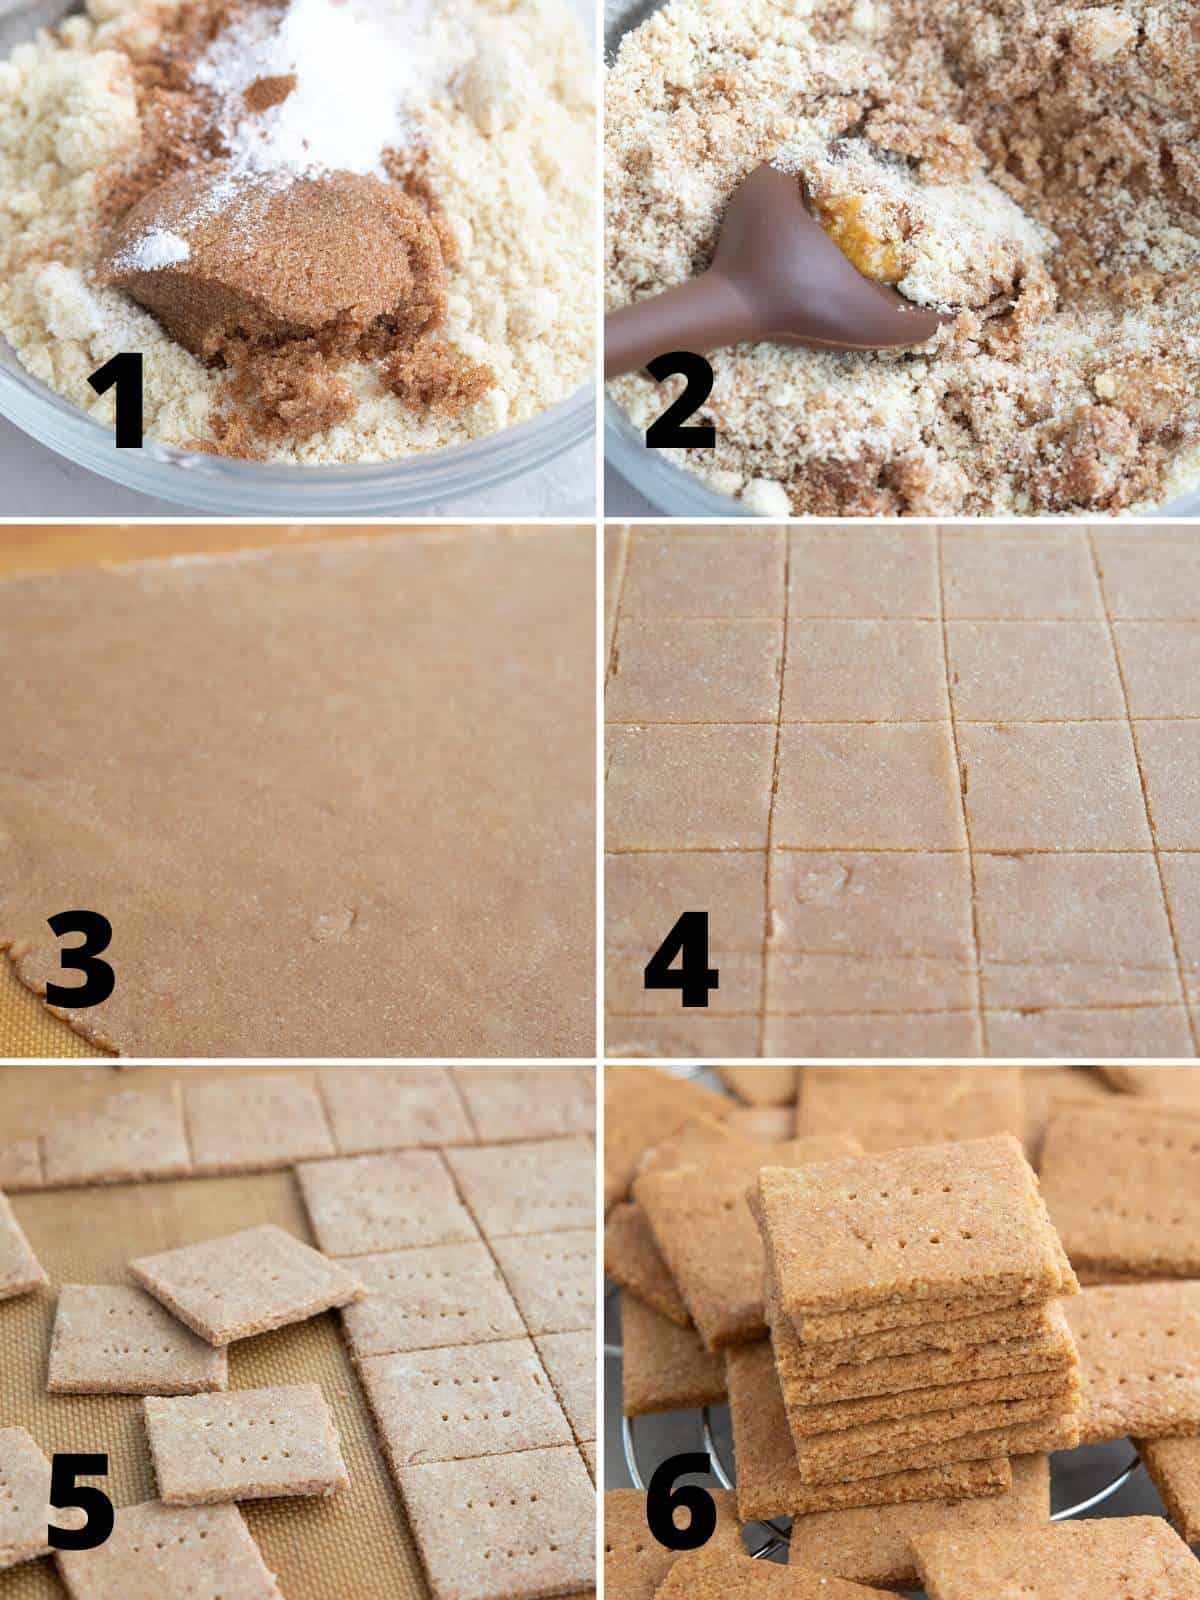 A collage of 6 images showing the steps for making keto graham crackers.